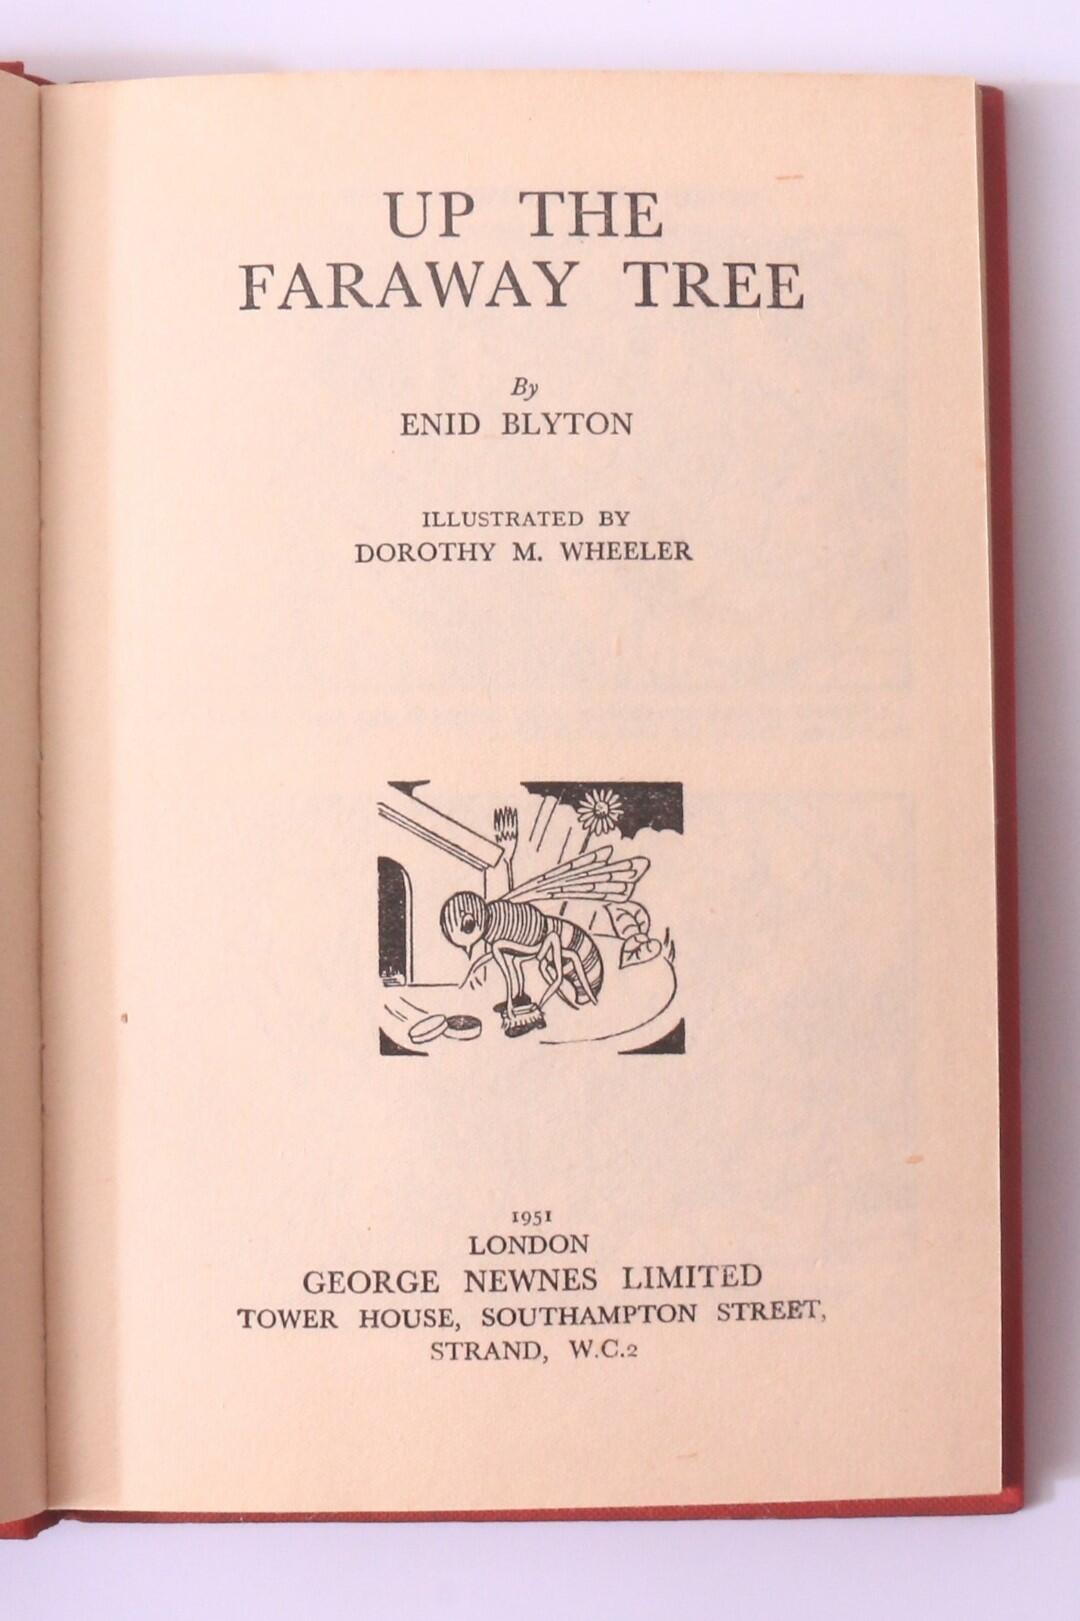 Enid Blyton - Up The Faraway Tree - Newnes, 1951, First Edition.